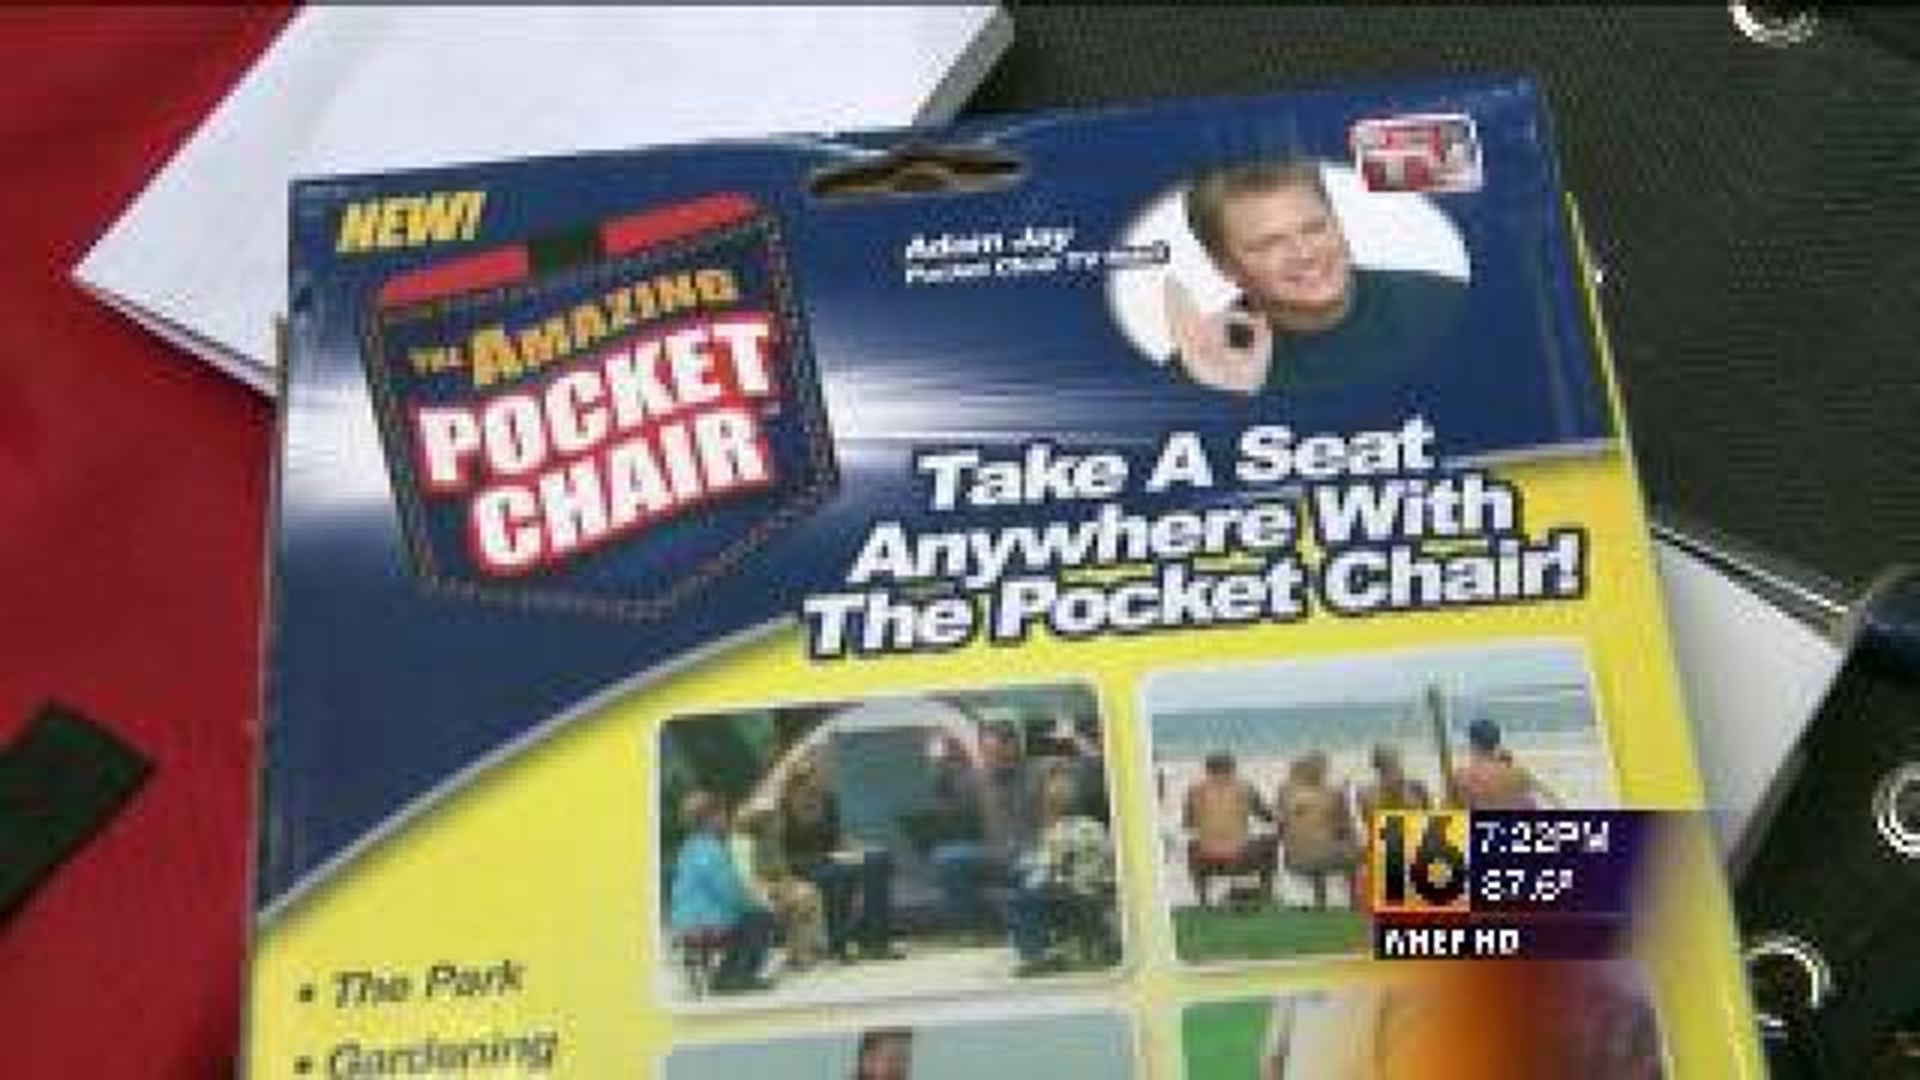 The Amazing Pocket Chair